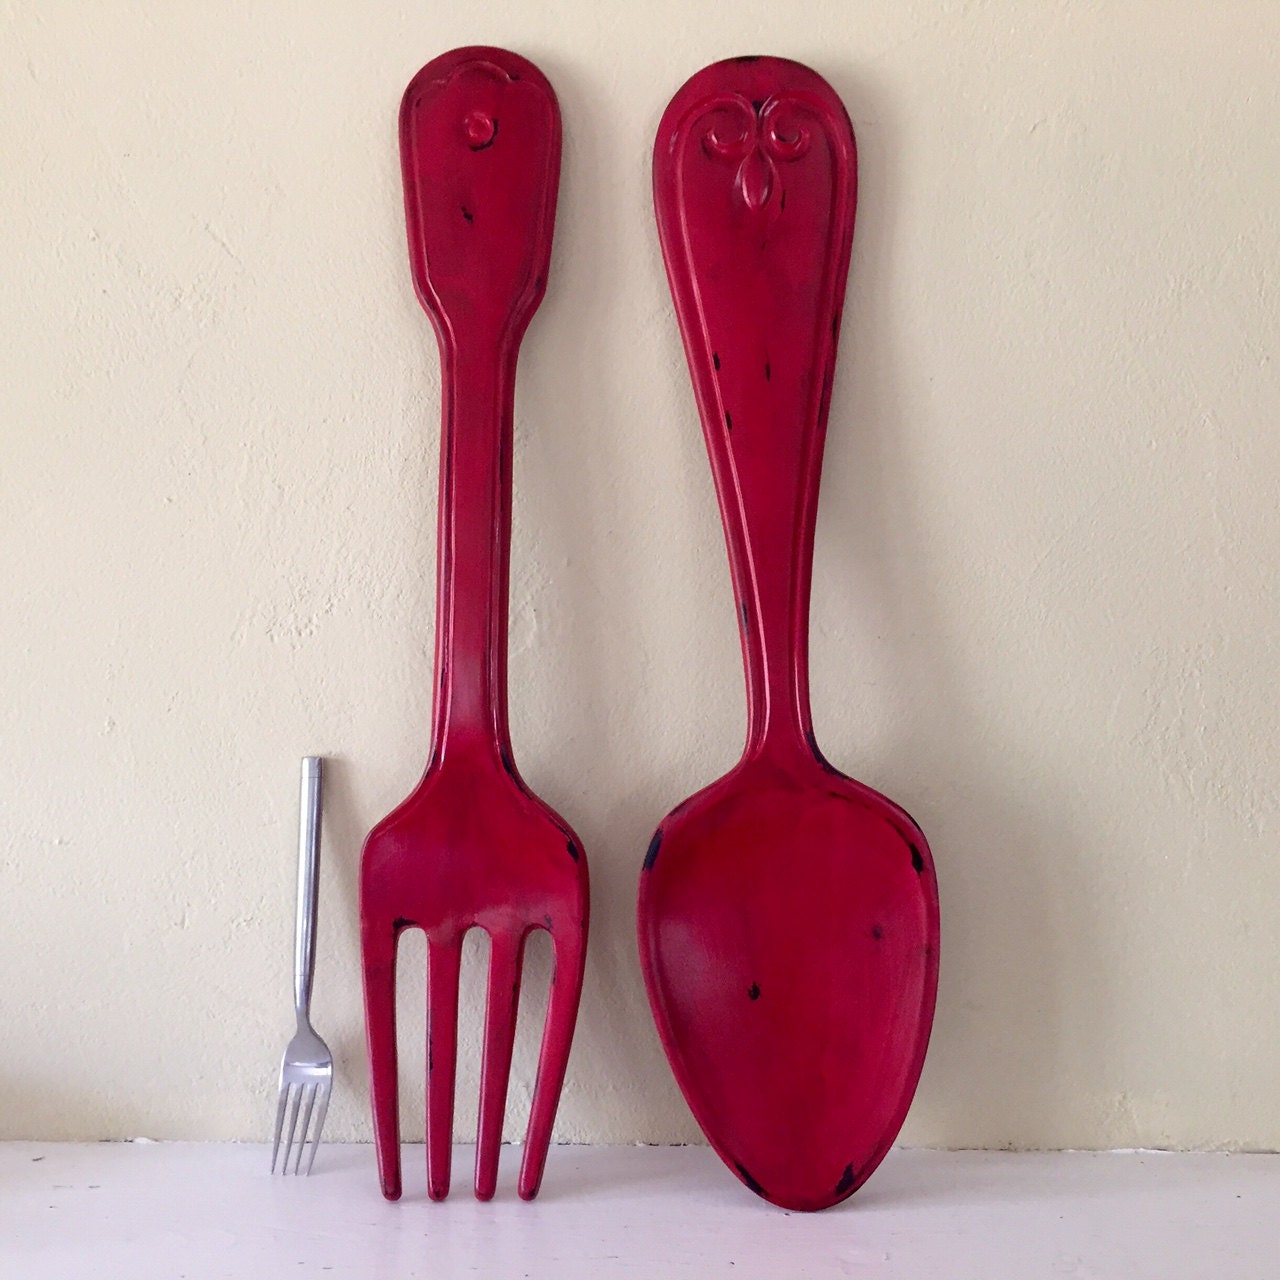 Xlarge fork and spoon wall decor distressed shabby chic Red